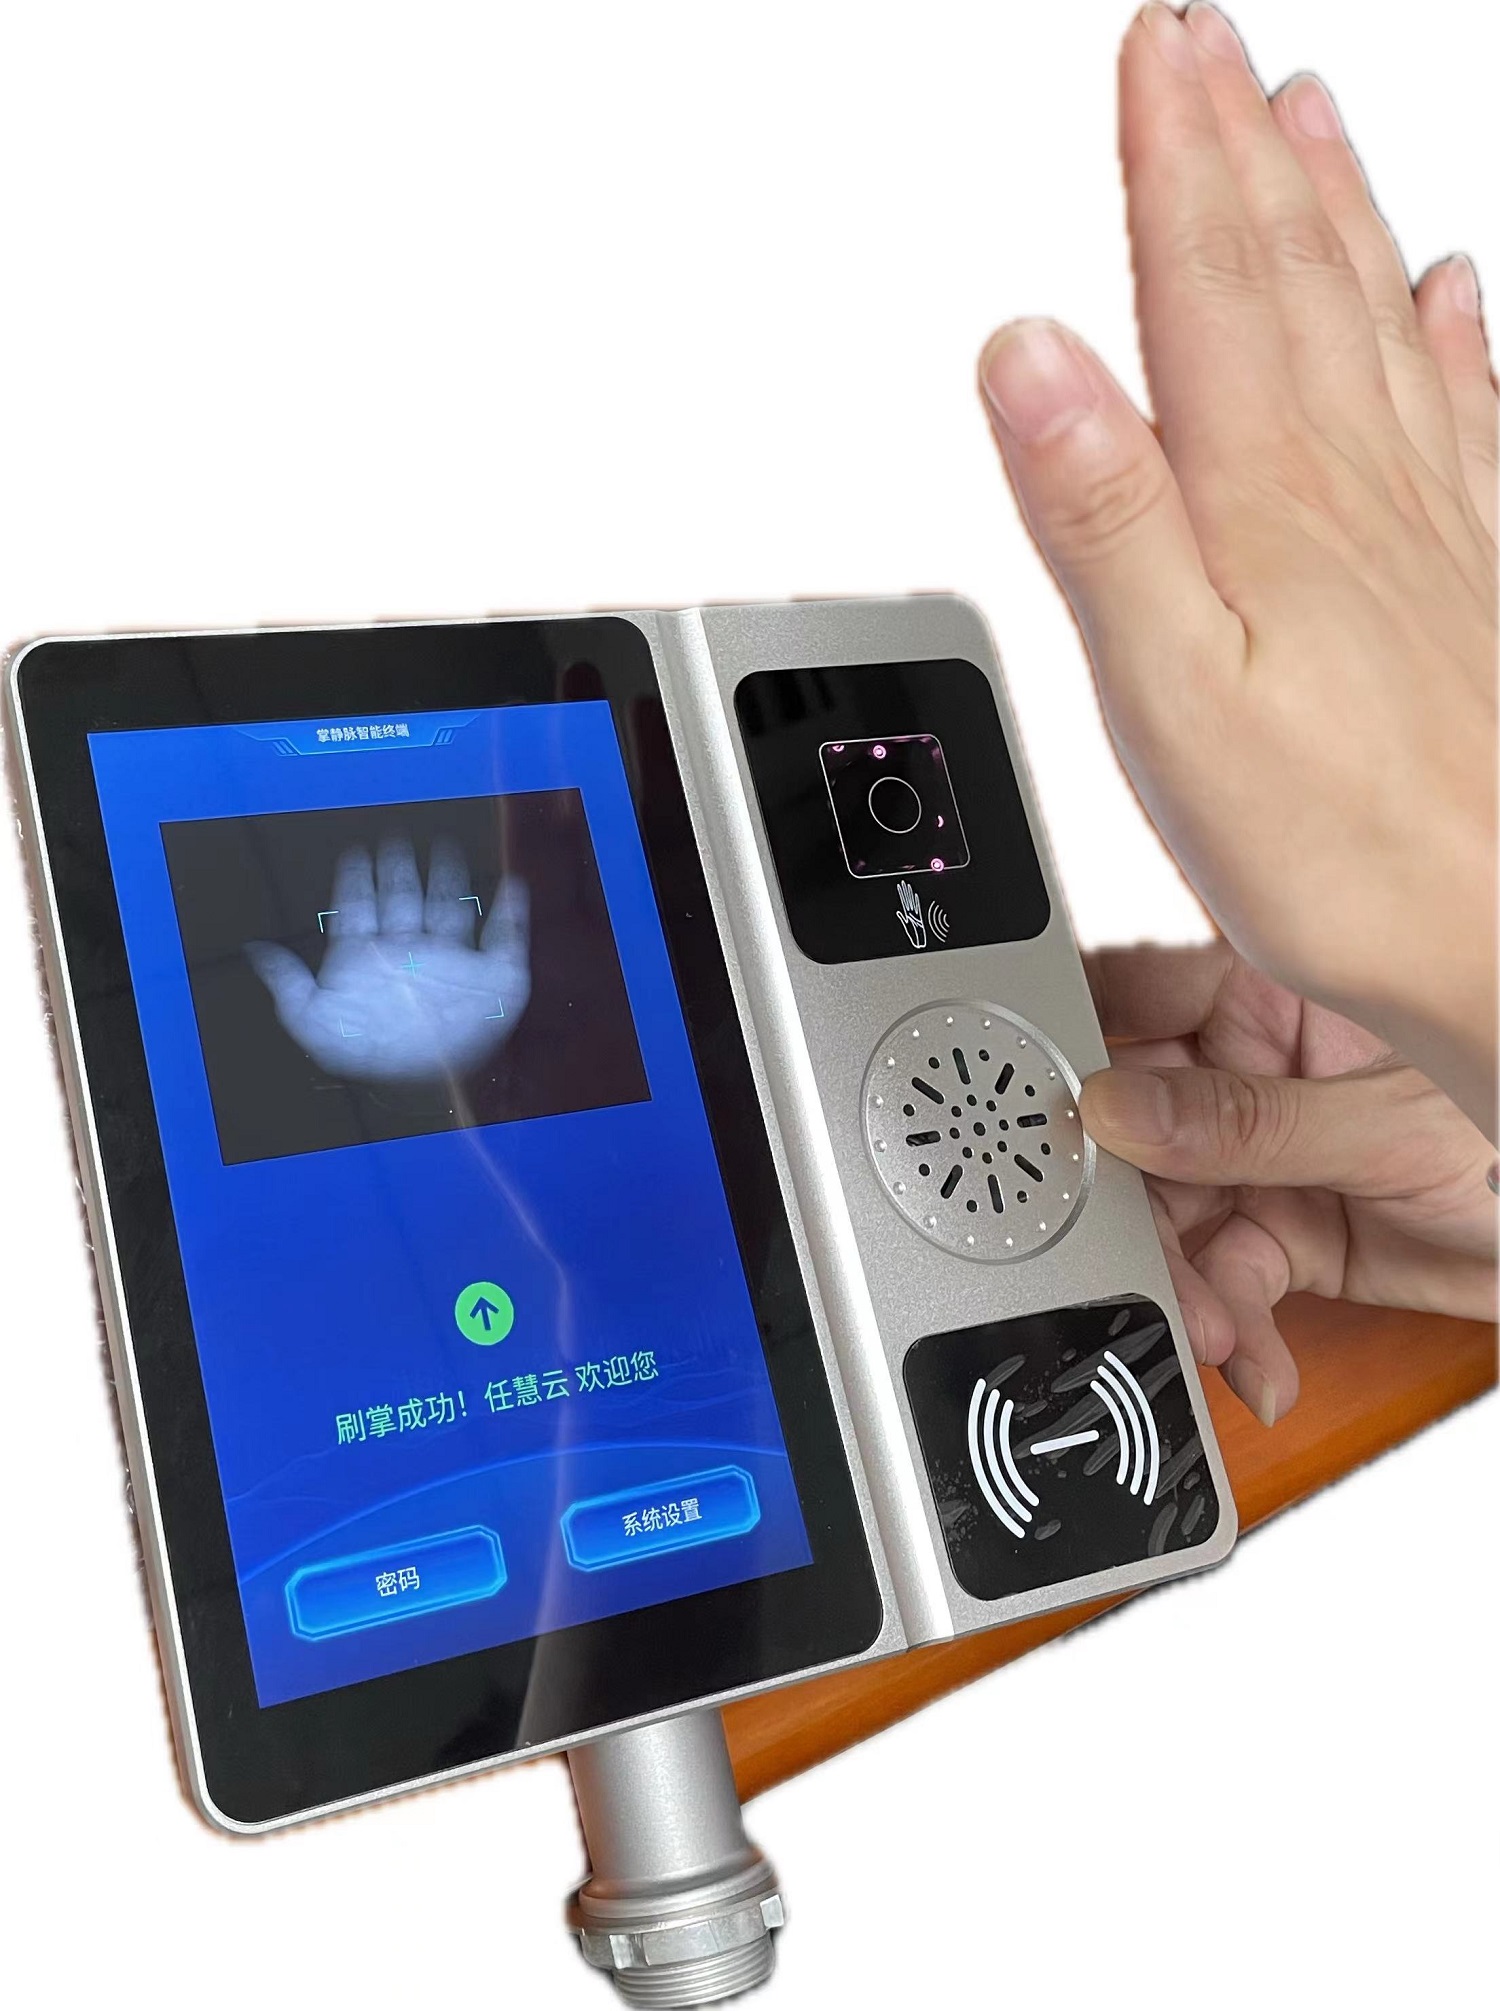 What is palm print recognition? What is its function?